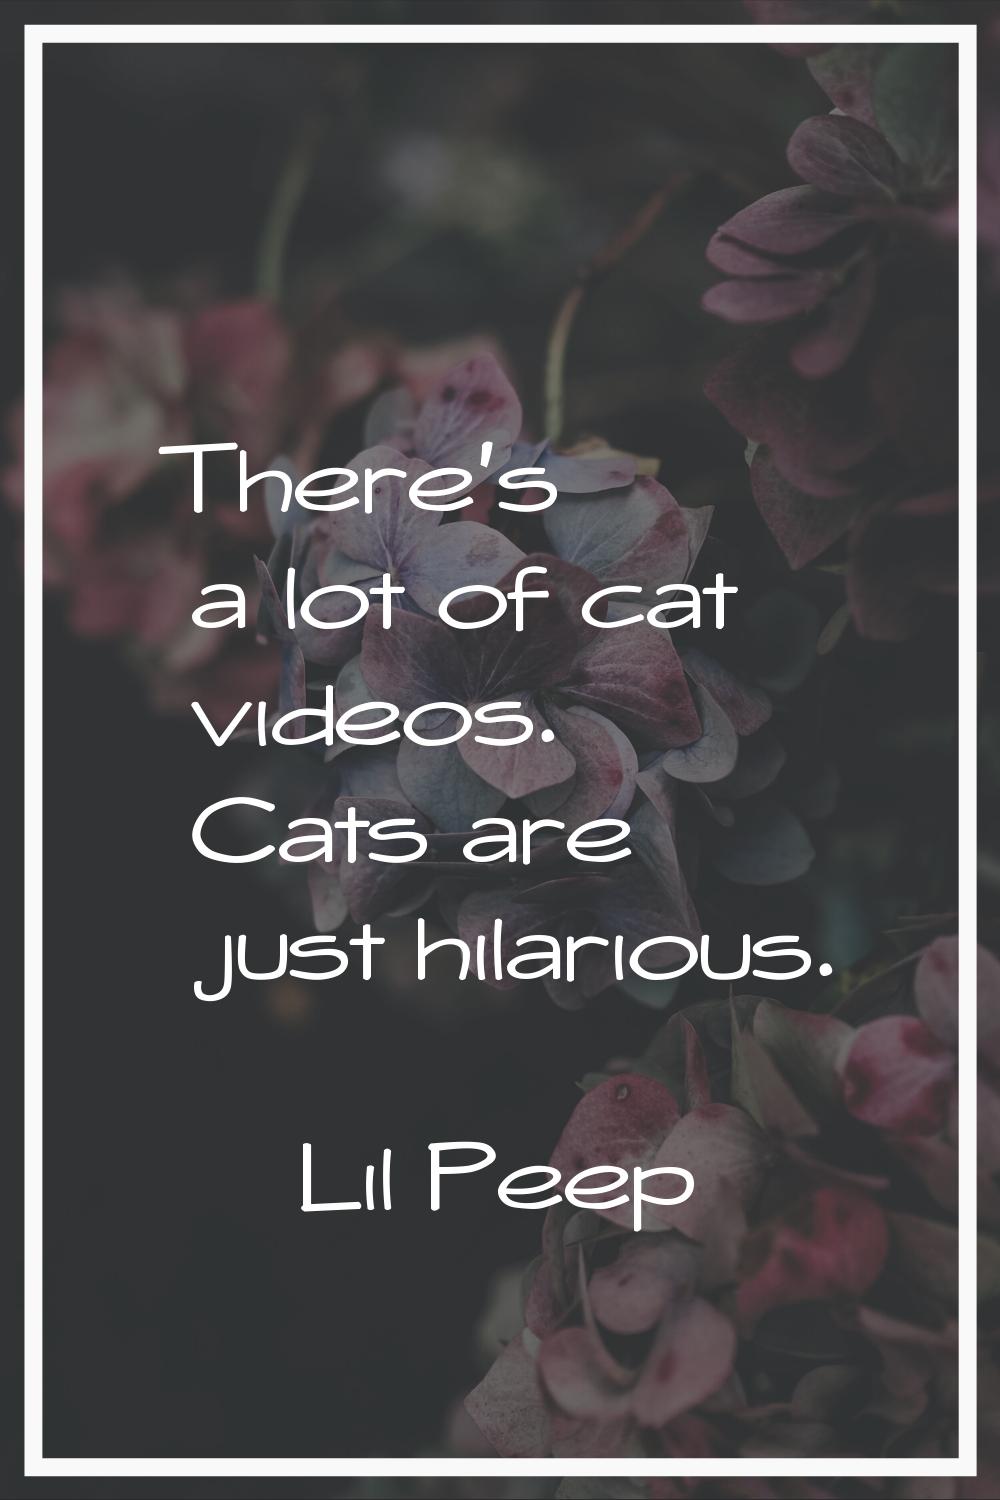 There's a lot of cat videos. Cats are just hilarious.